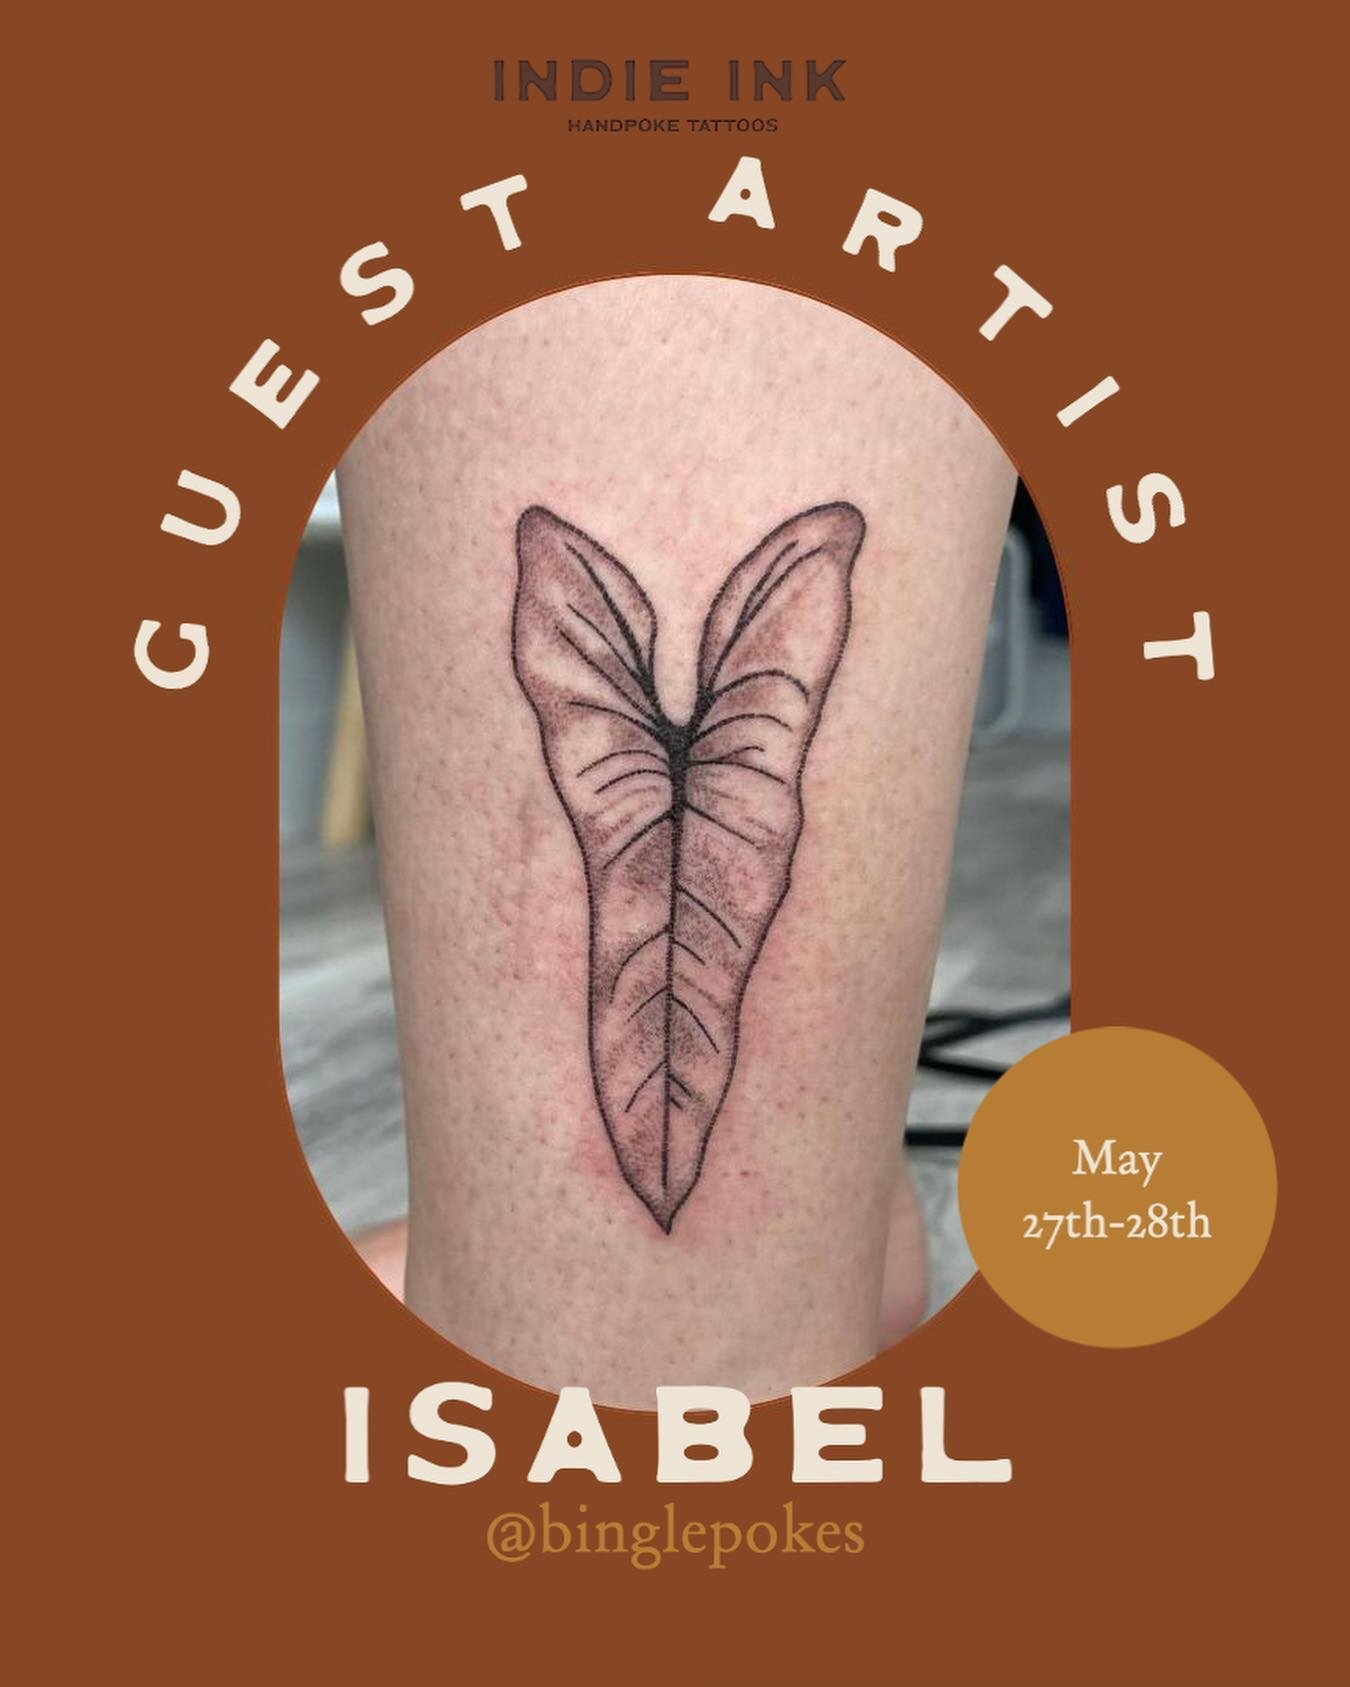 ⊹ We at Indie Ink are so excited to have handpoke artist Isabel (@binglepokes) as a guest artist at the shop on May 27th and 28th. 
Check out some of her flash available on the next few slides! We can&rsquo;t wait to see what y&rsquo;all get.✨ 

⊹ Dm